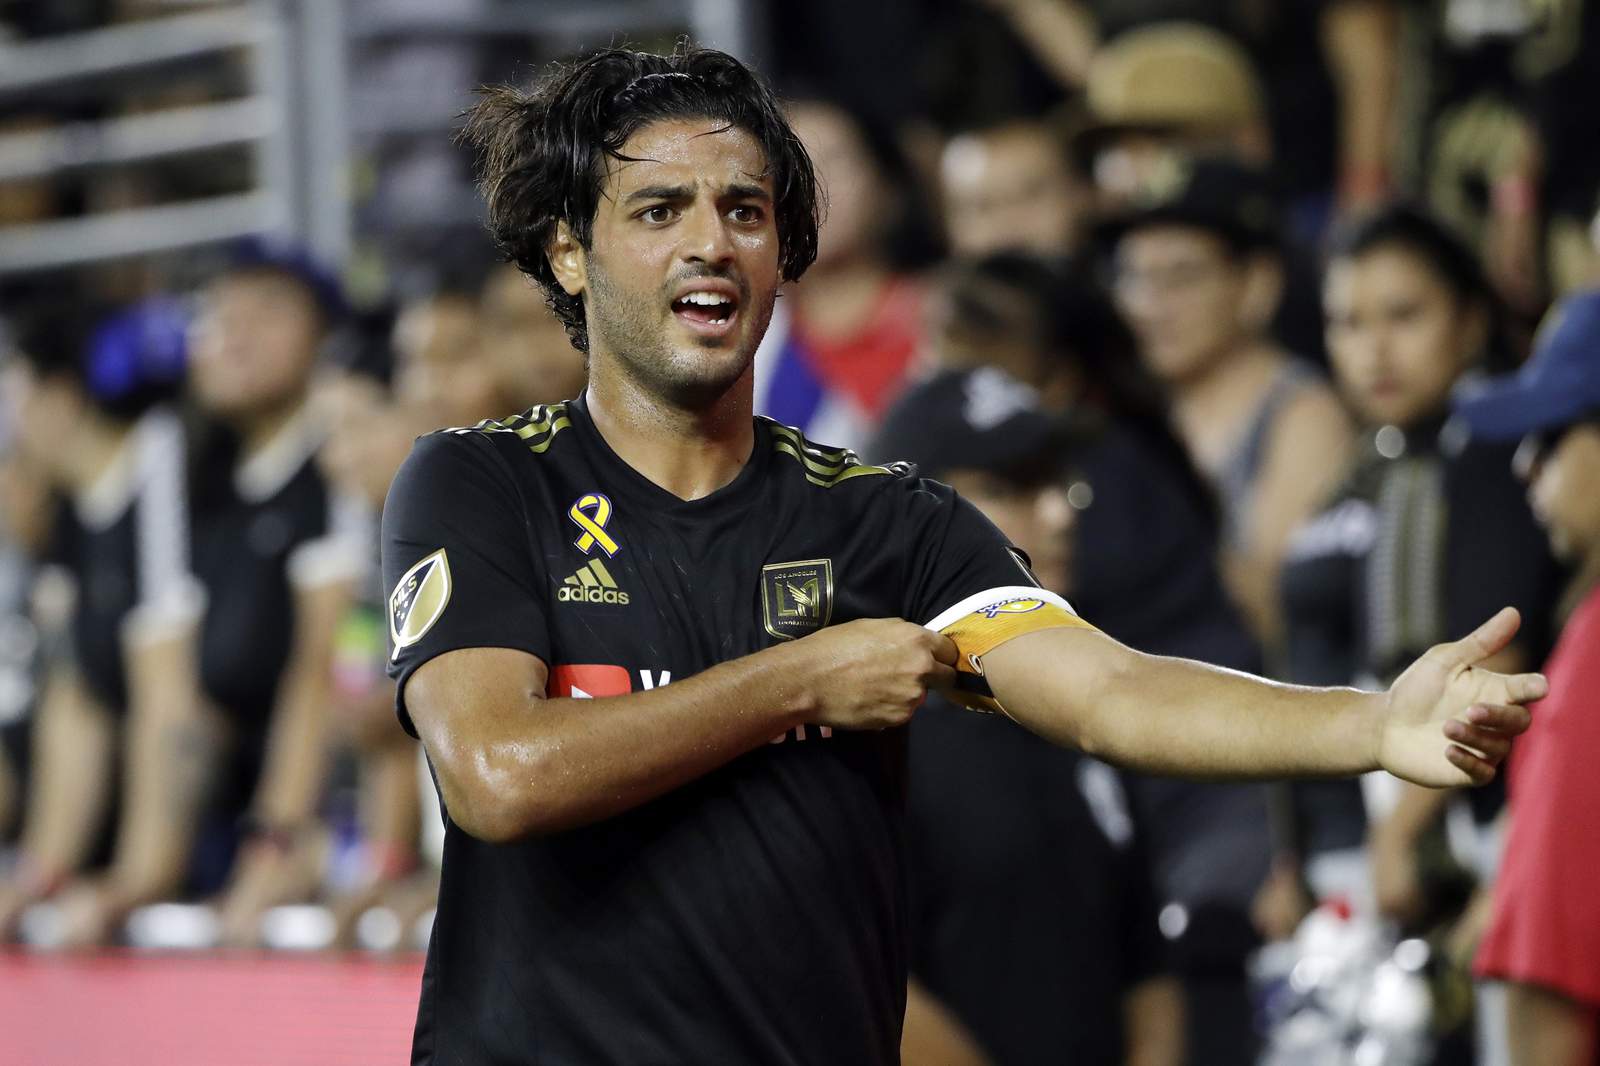 LAFC's Carlos Vela has knee injury, likely out a few weeks